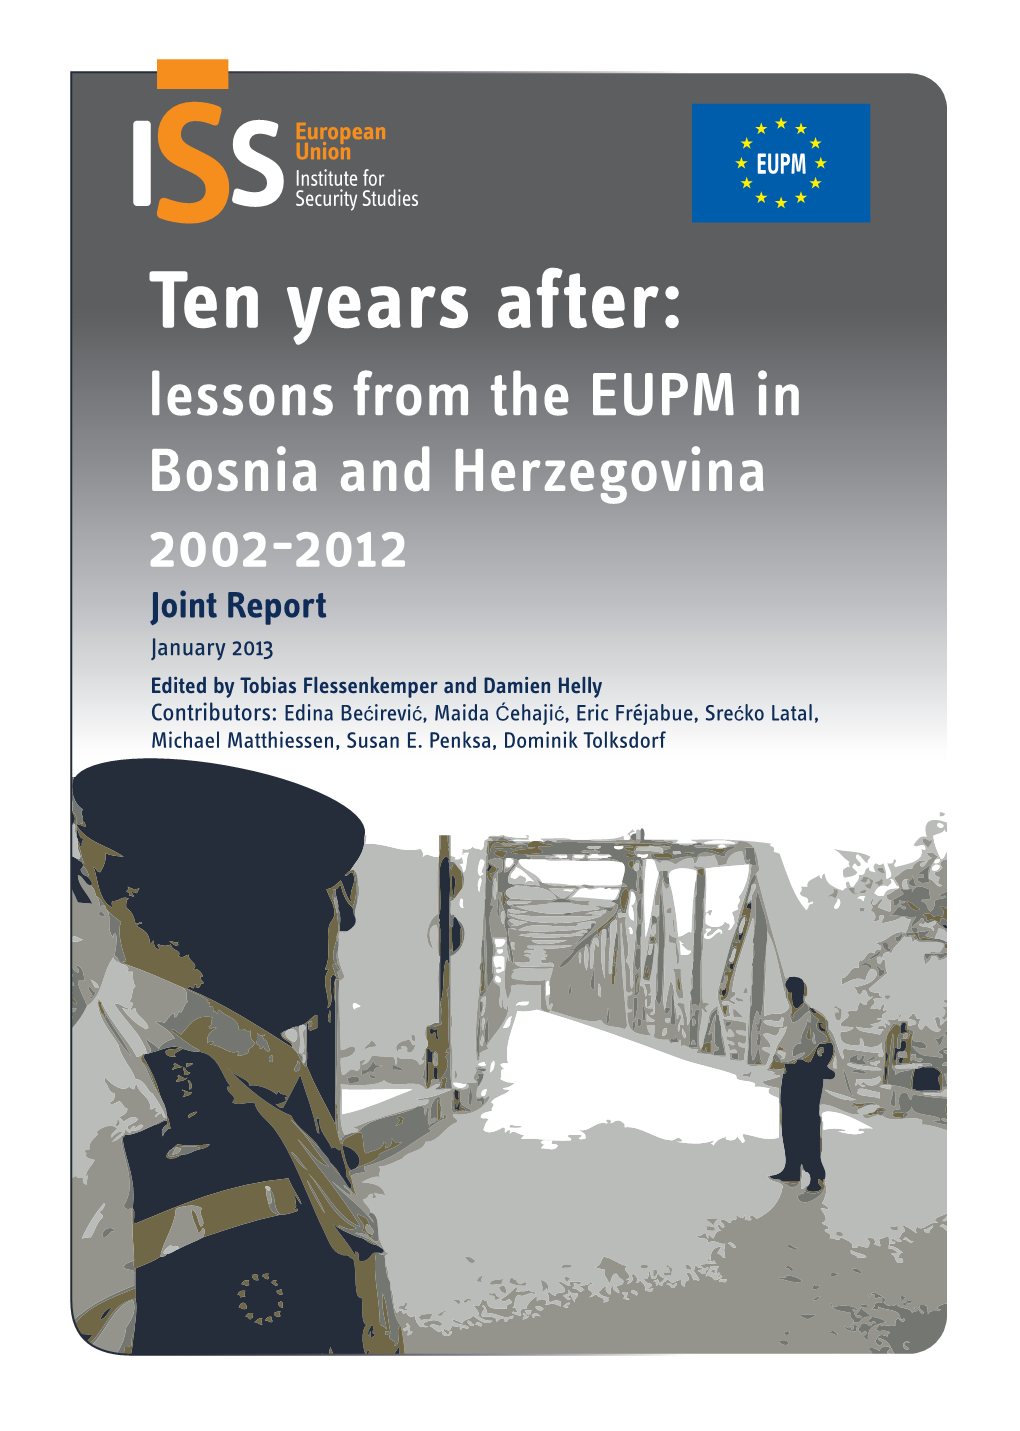 Ten Years After: Lessons from the EUPM in Bosnia and Herzegovina 2002-2012